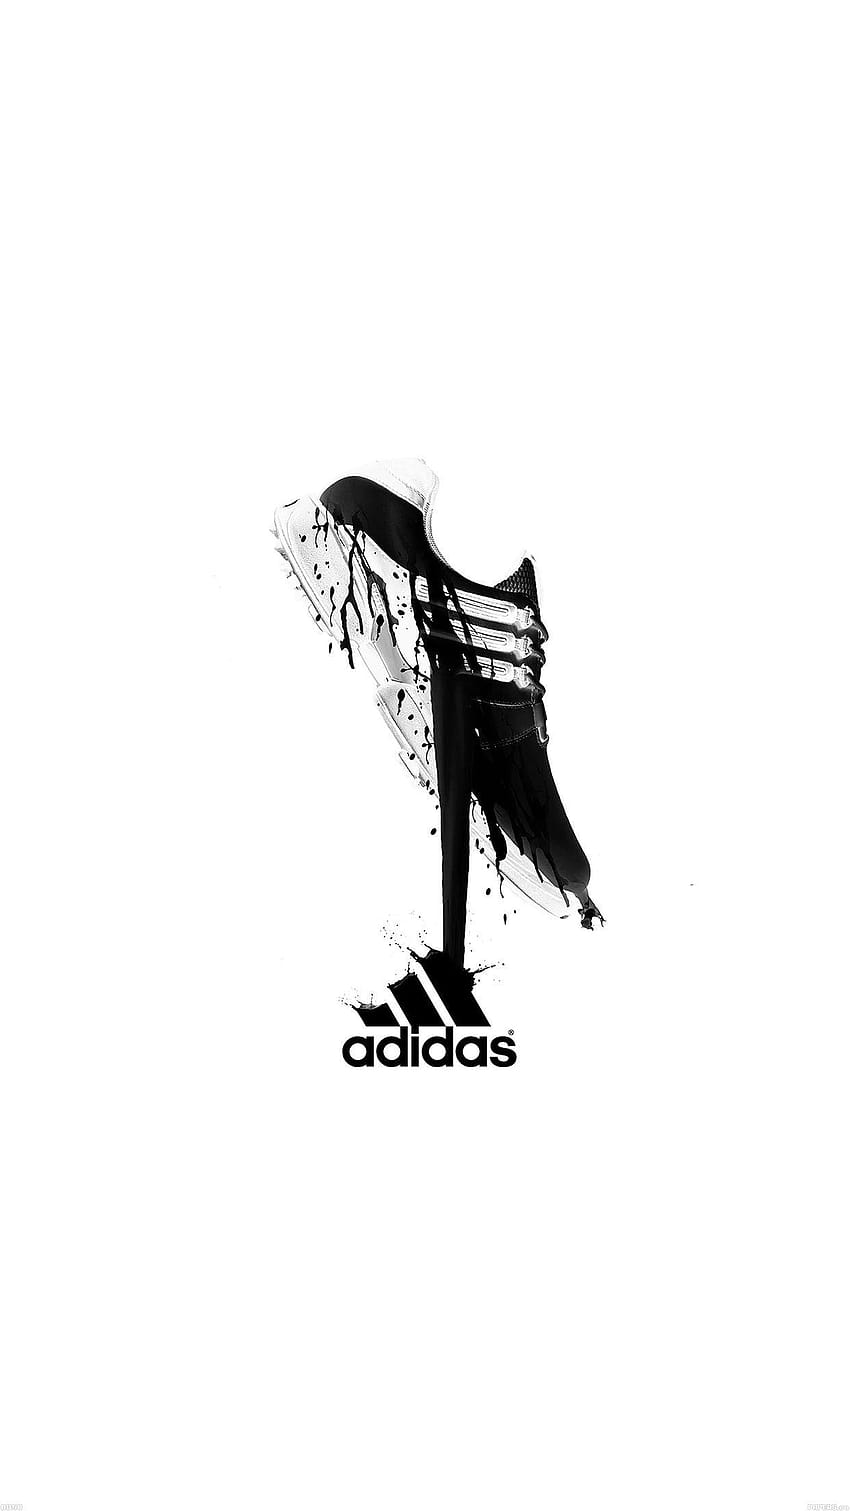 iPhonePapers, black and white adidas HD phone wallpaper